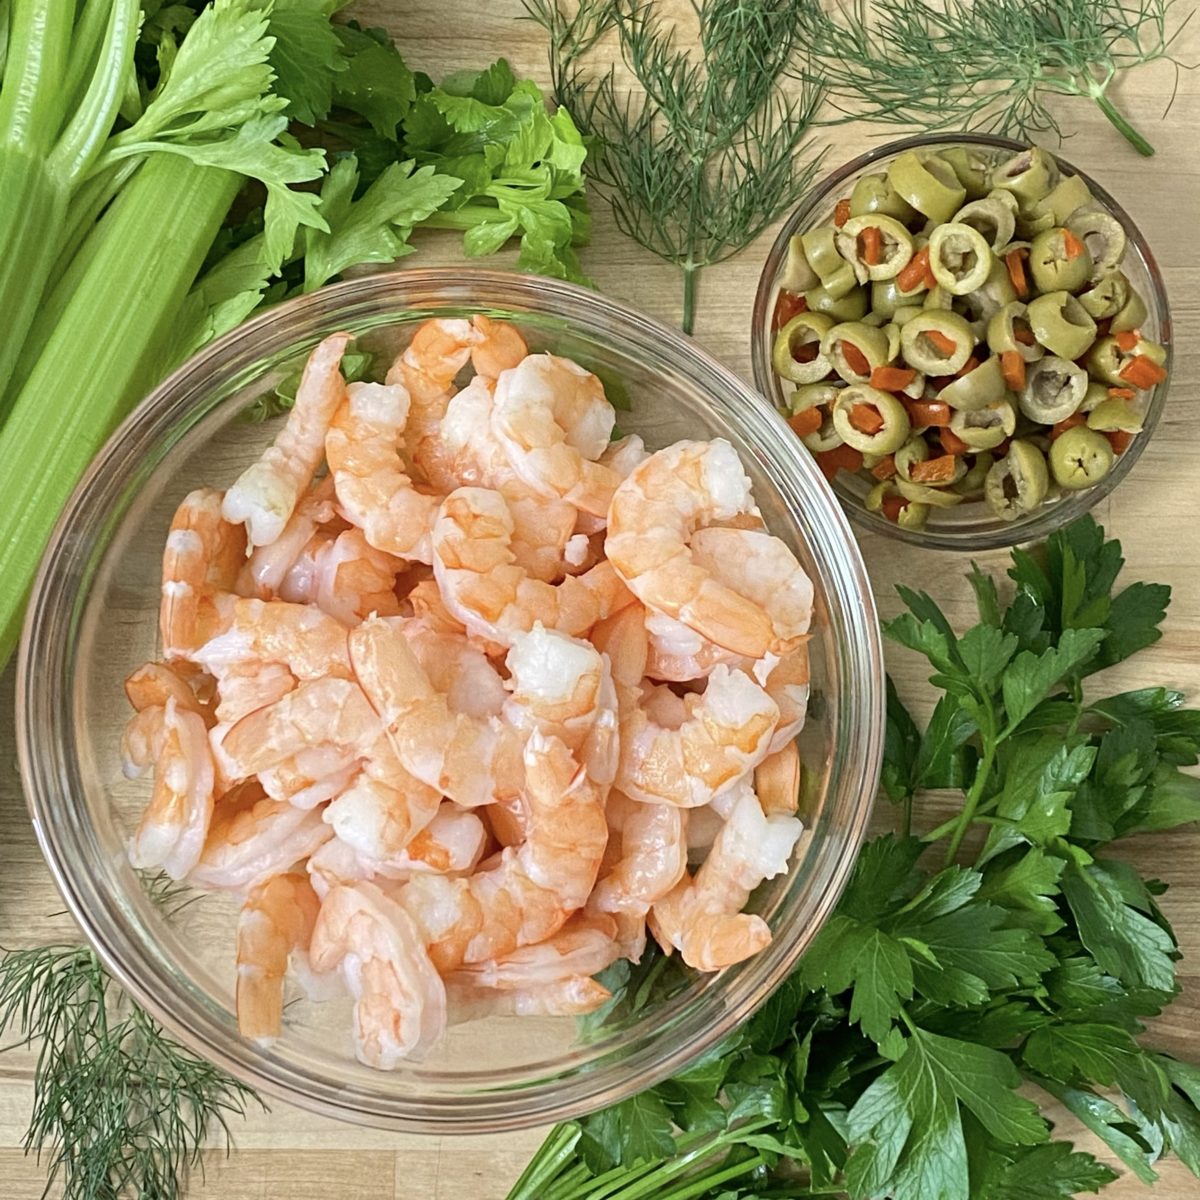 Shrimp, fresh parsley, celery, green olives and fresh dill on the counter.